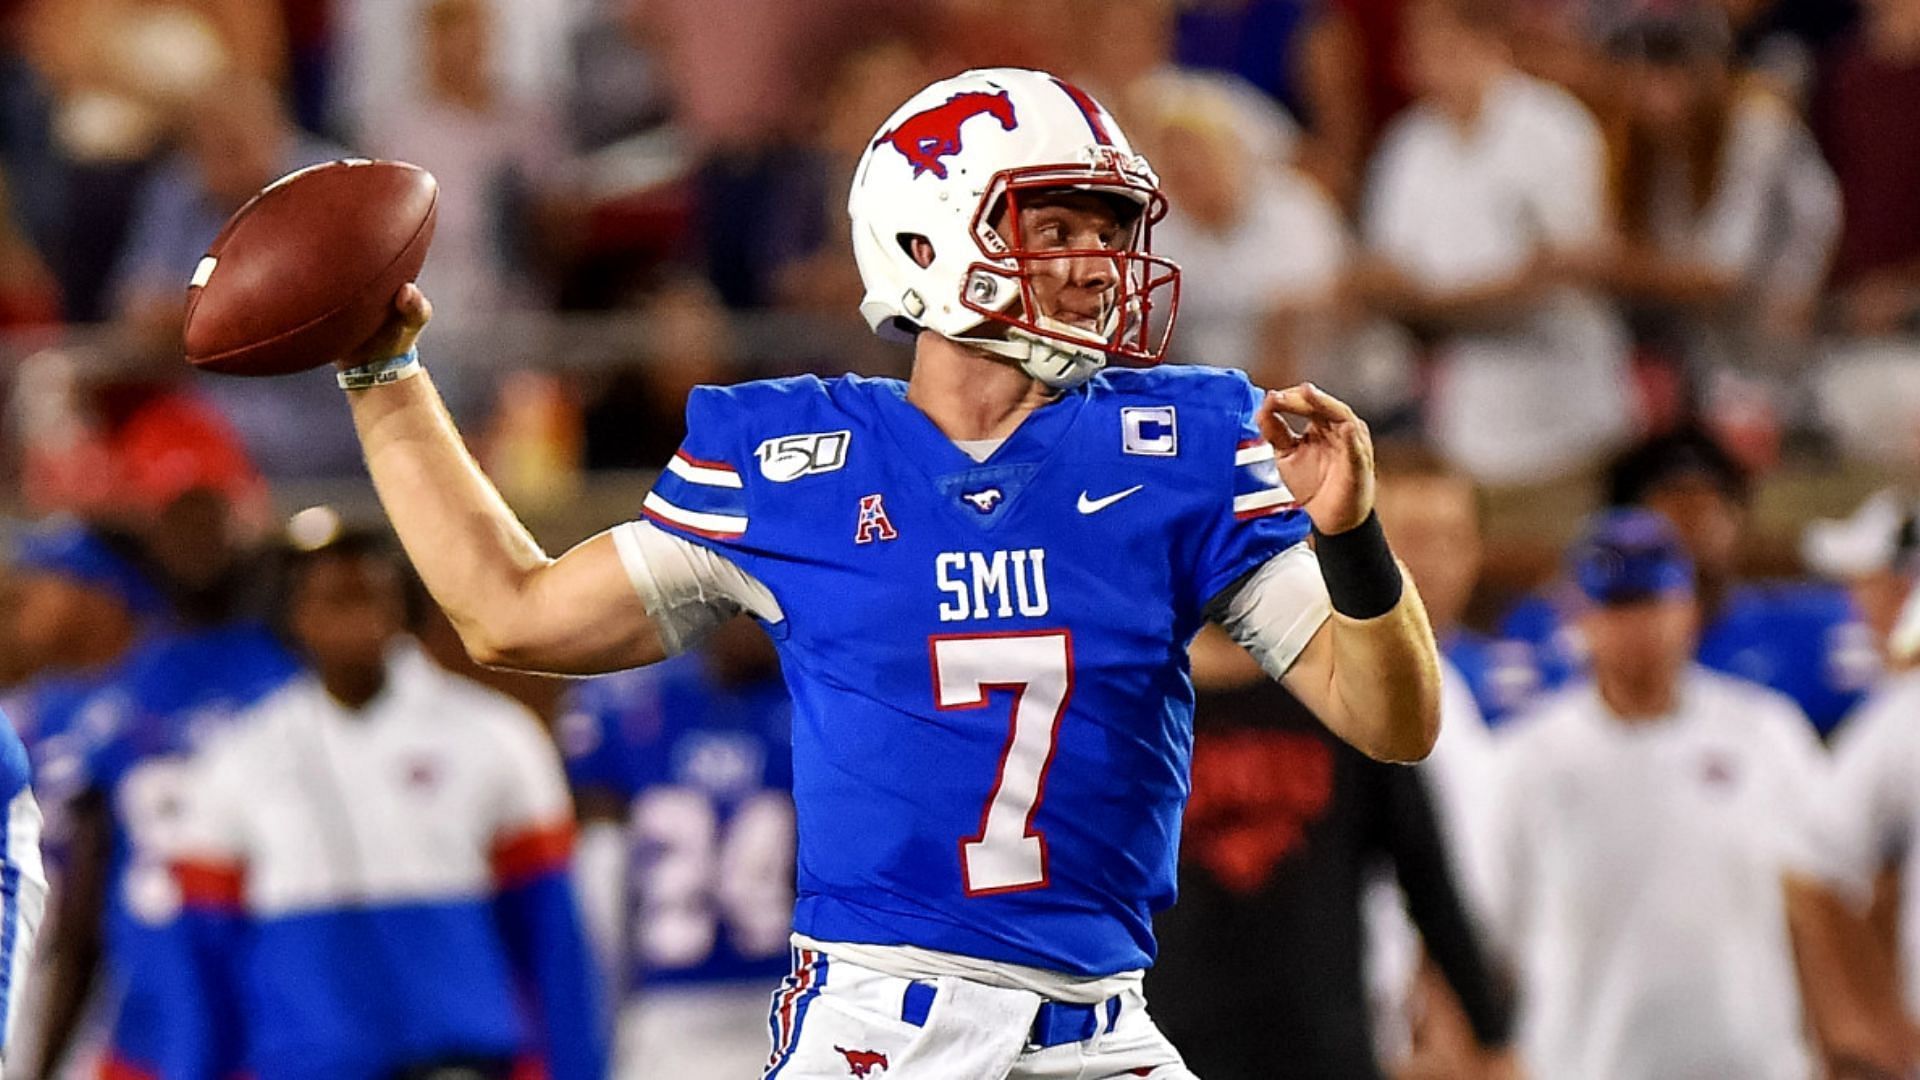 Having the SMU Mustangs join the ACC could provide some value